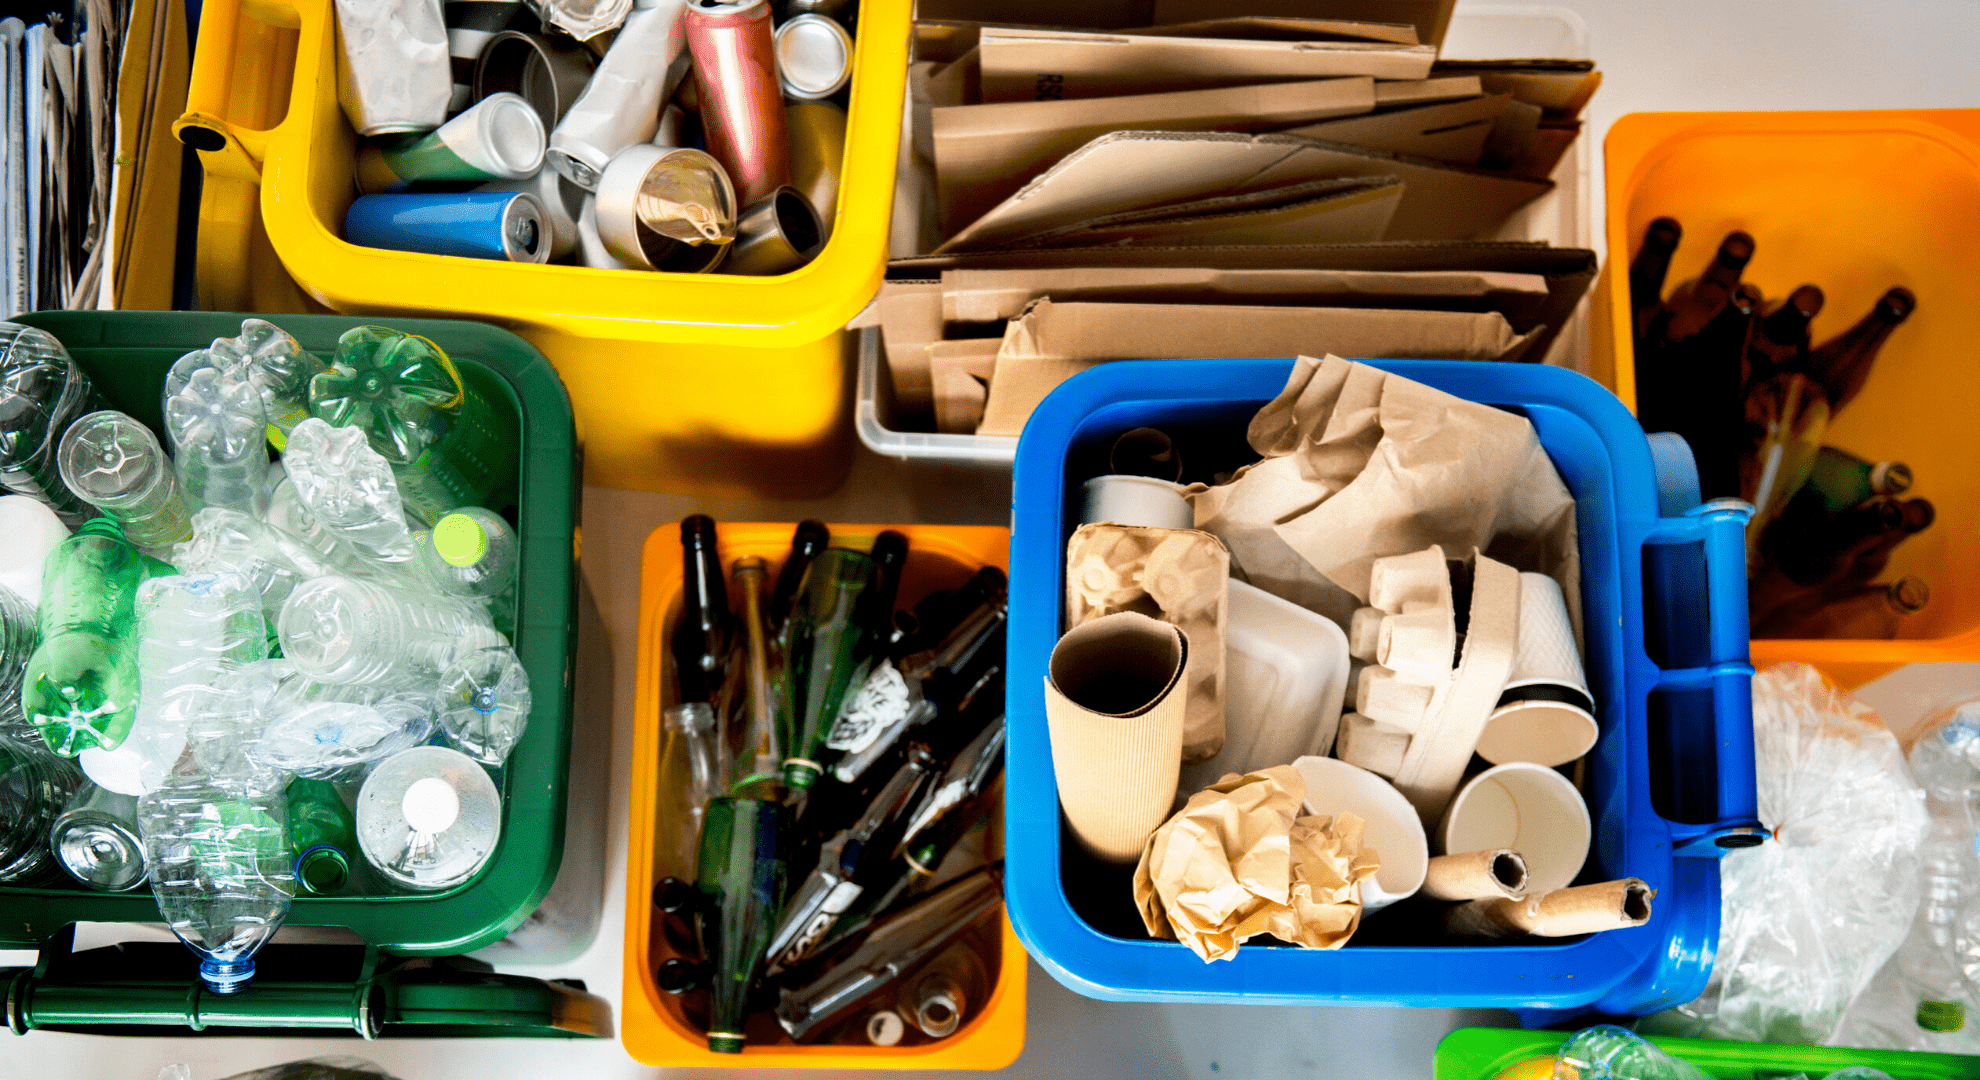 Household recycling segregated into different bins